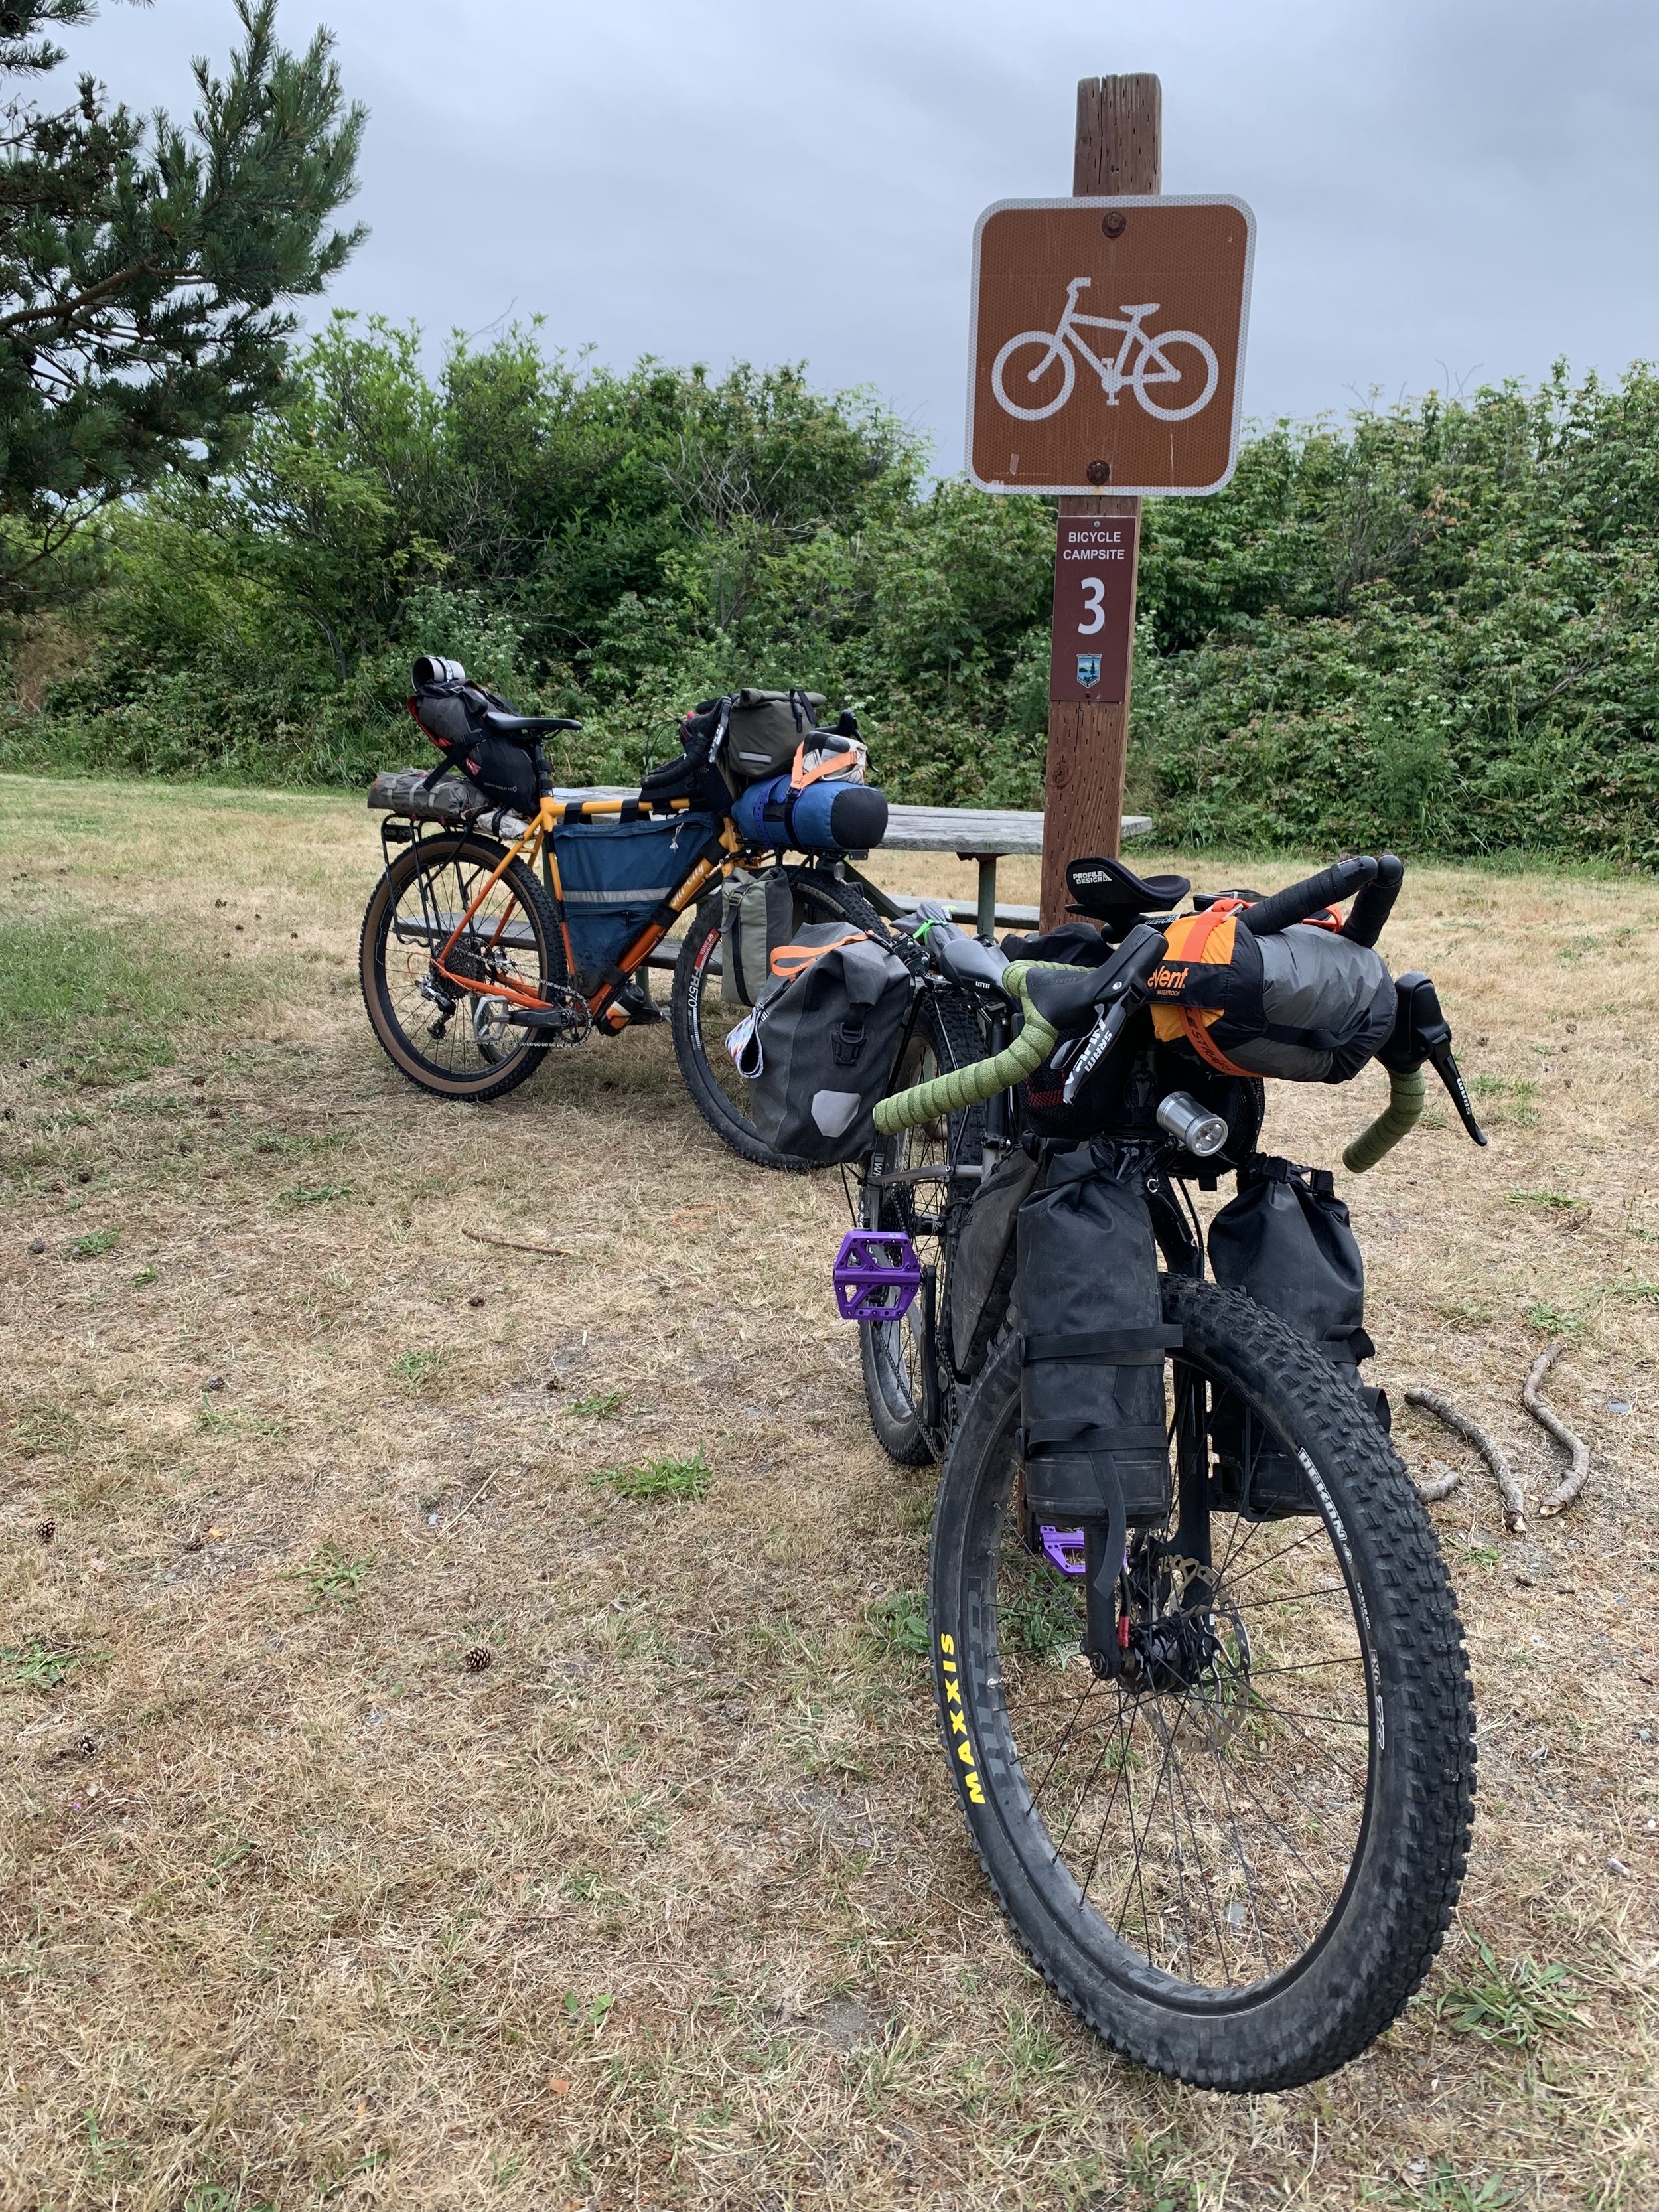  Bike camping spot at Fort Worden in Port Townsend 